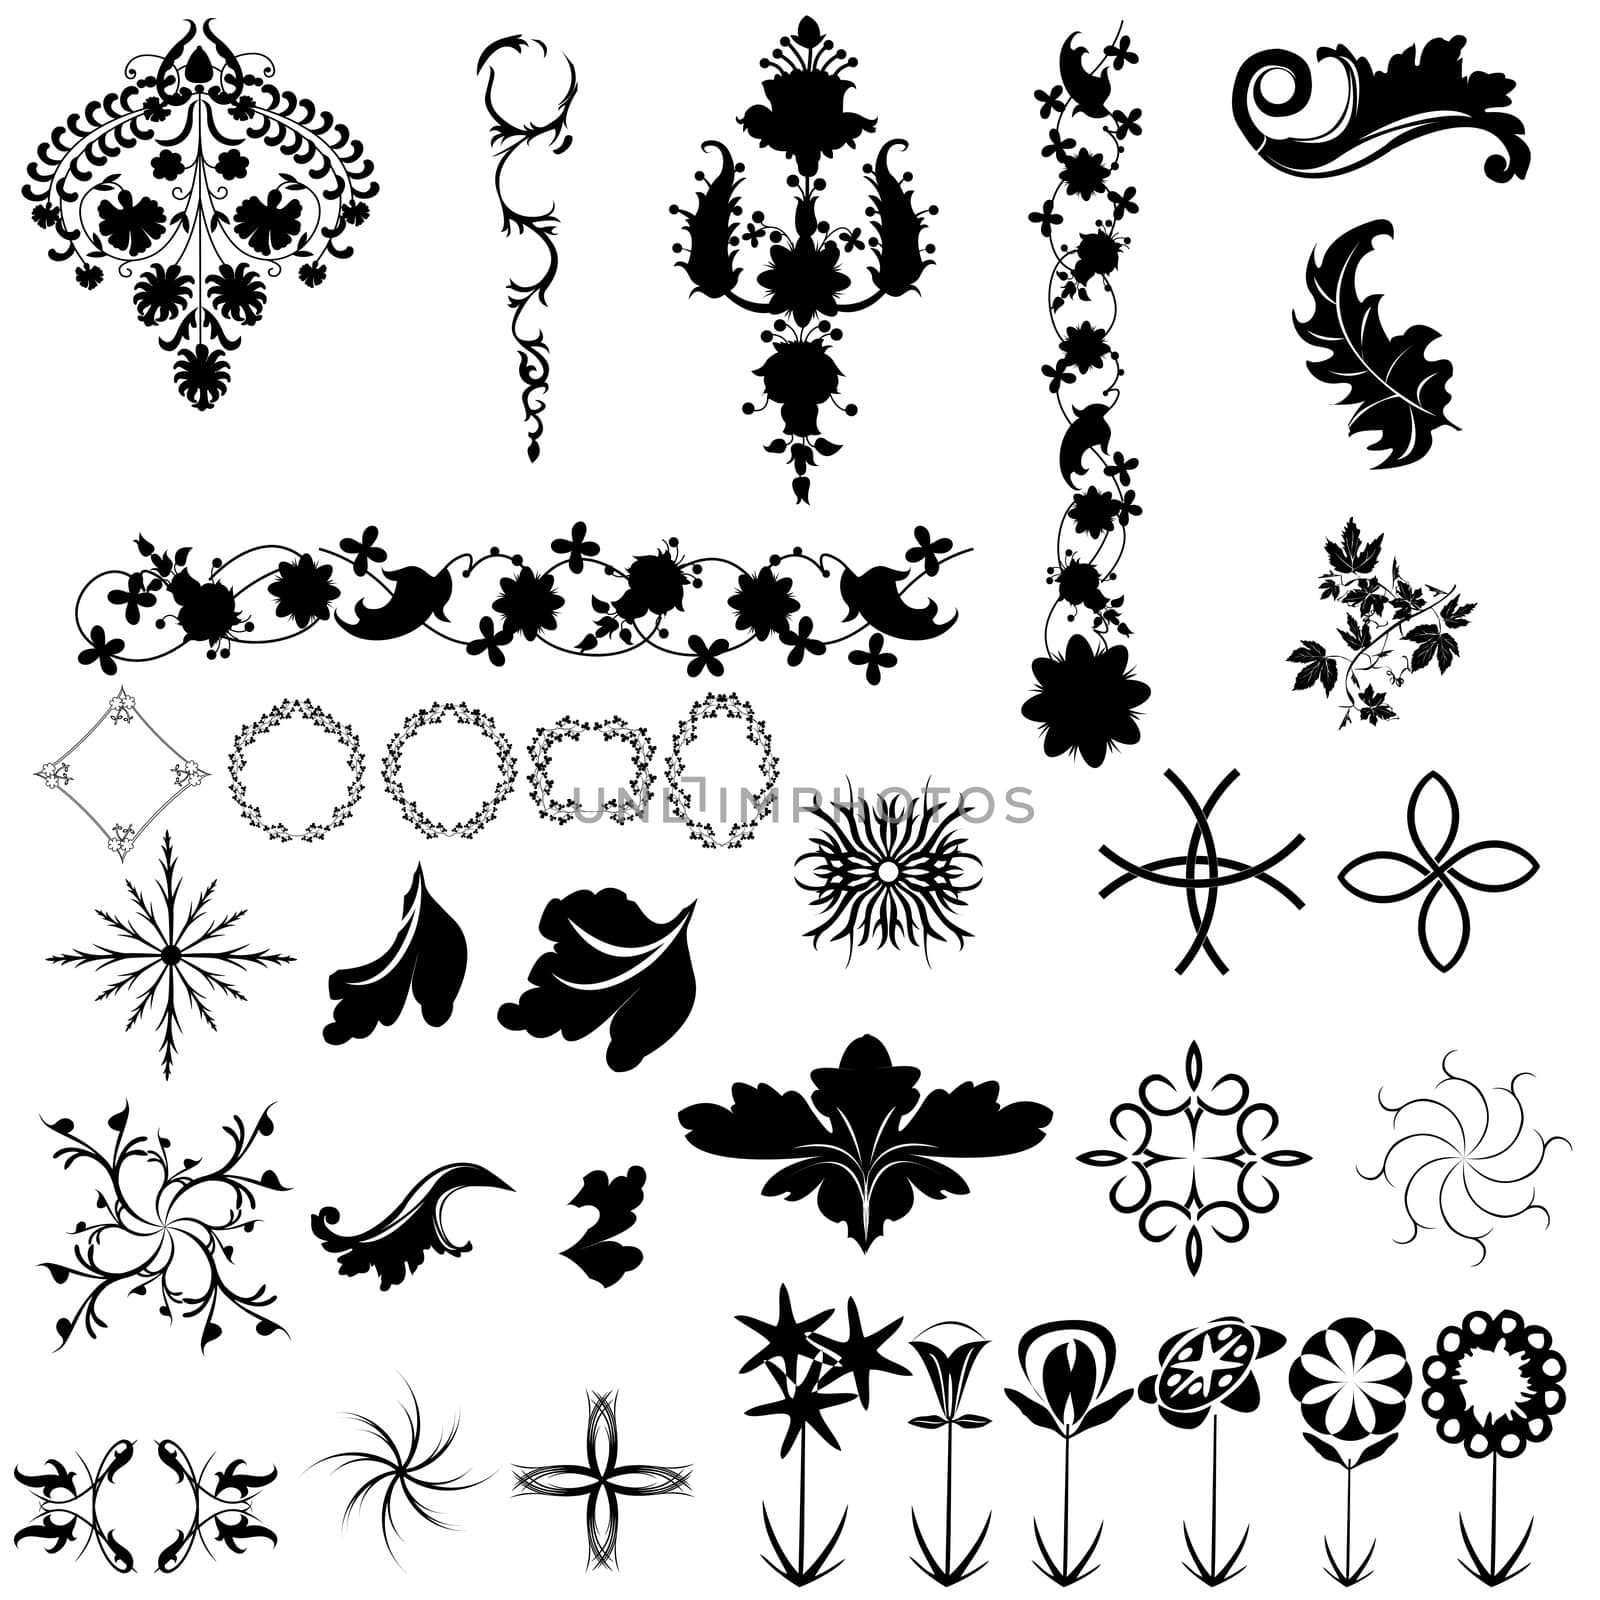 Collection of design elements, vintage graphic. isolated objects over white background